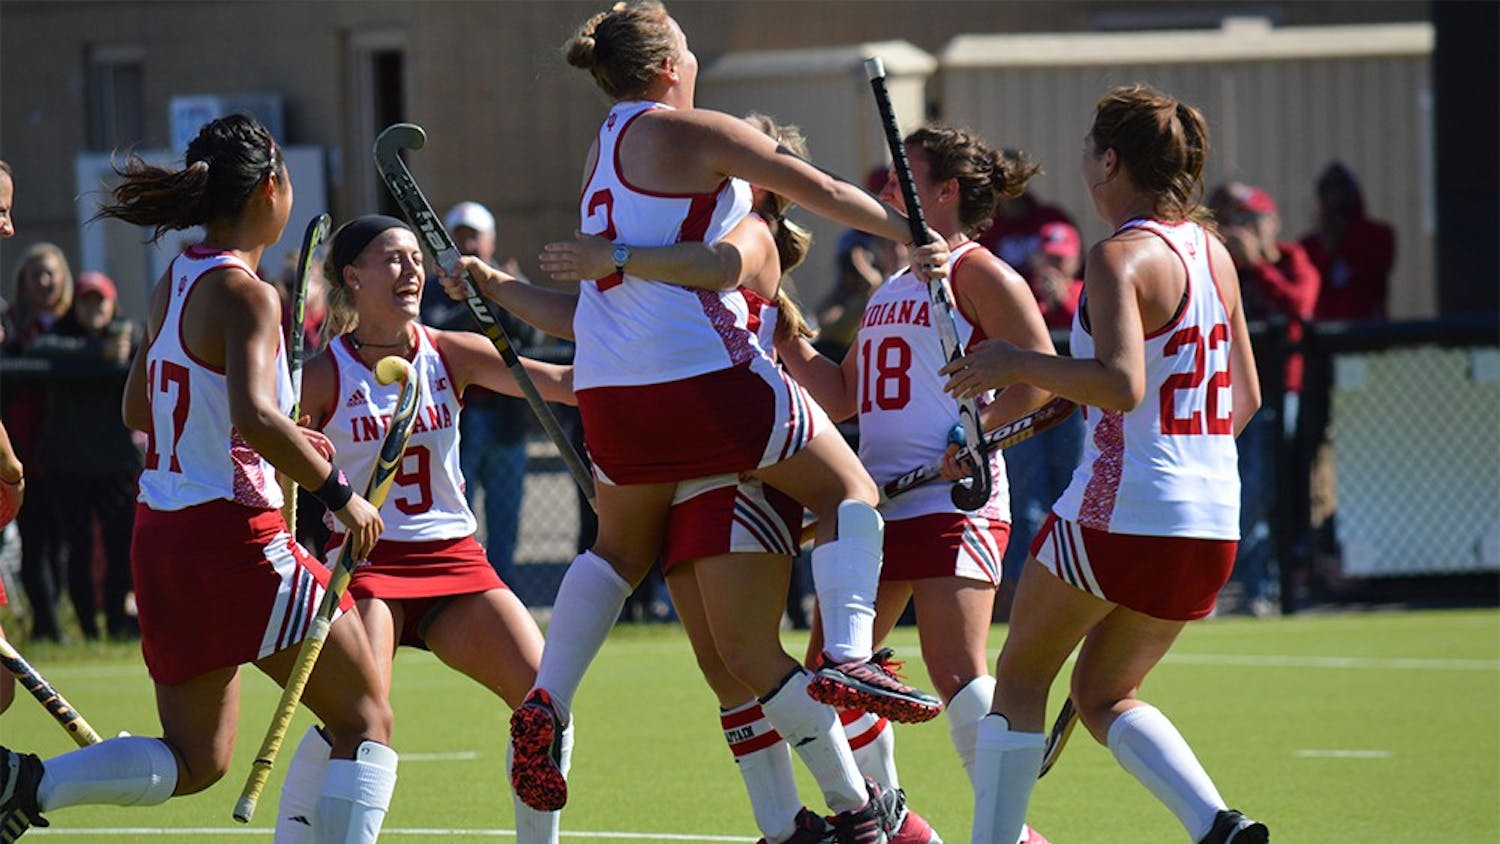 The IU field hockey team celebrates after a goal during the game against Penn State Sunday afternoon at the IU Field Hockey Complex. The Hoosiers defeated the Nittany Lions 1-0.